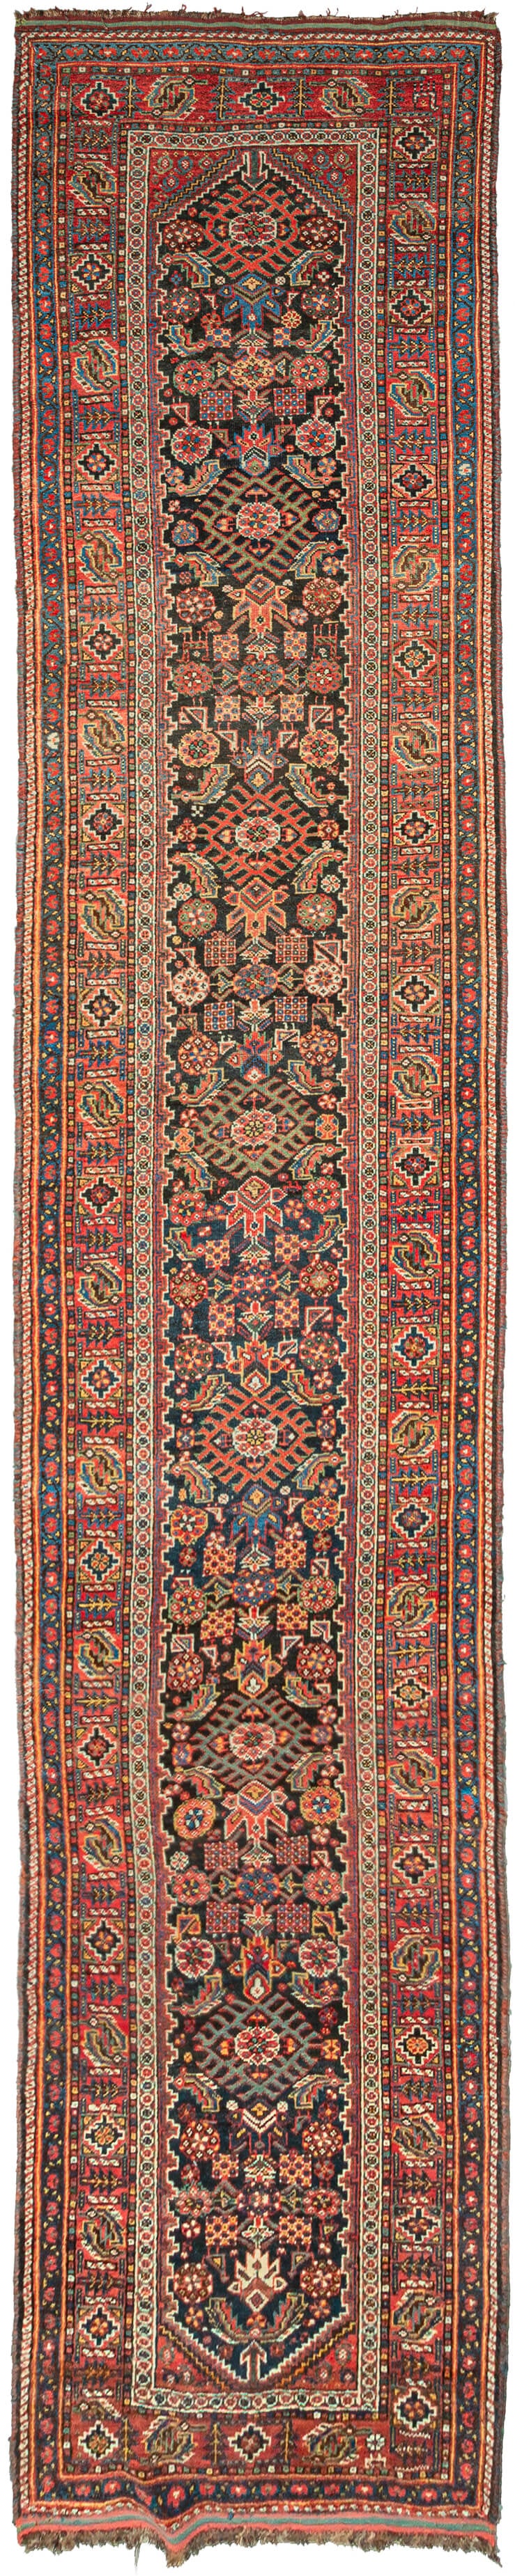 antique South Persian Qashqai runner featuring a large-scale repeat Herati design in various tones of blue, green, red, yellow, and ivory on a dark navy ground. With a main border of stepped octagons and fish-like serrated leaves that are surrounded by multiple minor borders of small boxes, floral meanders, button-like circles, and classic Qashqa'i diagonal stripes. Look closely to see the addition of various stylized birds and the addition of what is likely a dog in a section of the main border